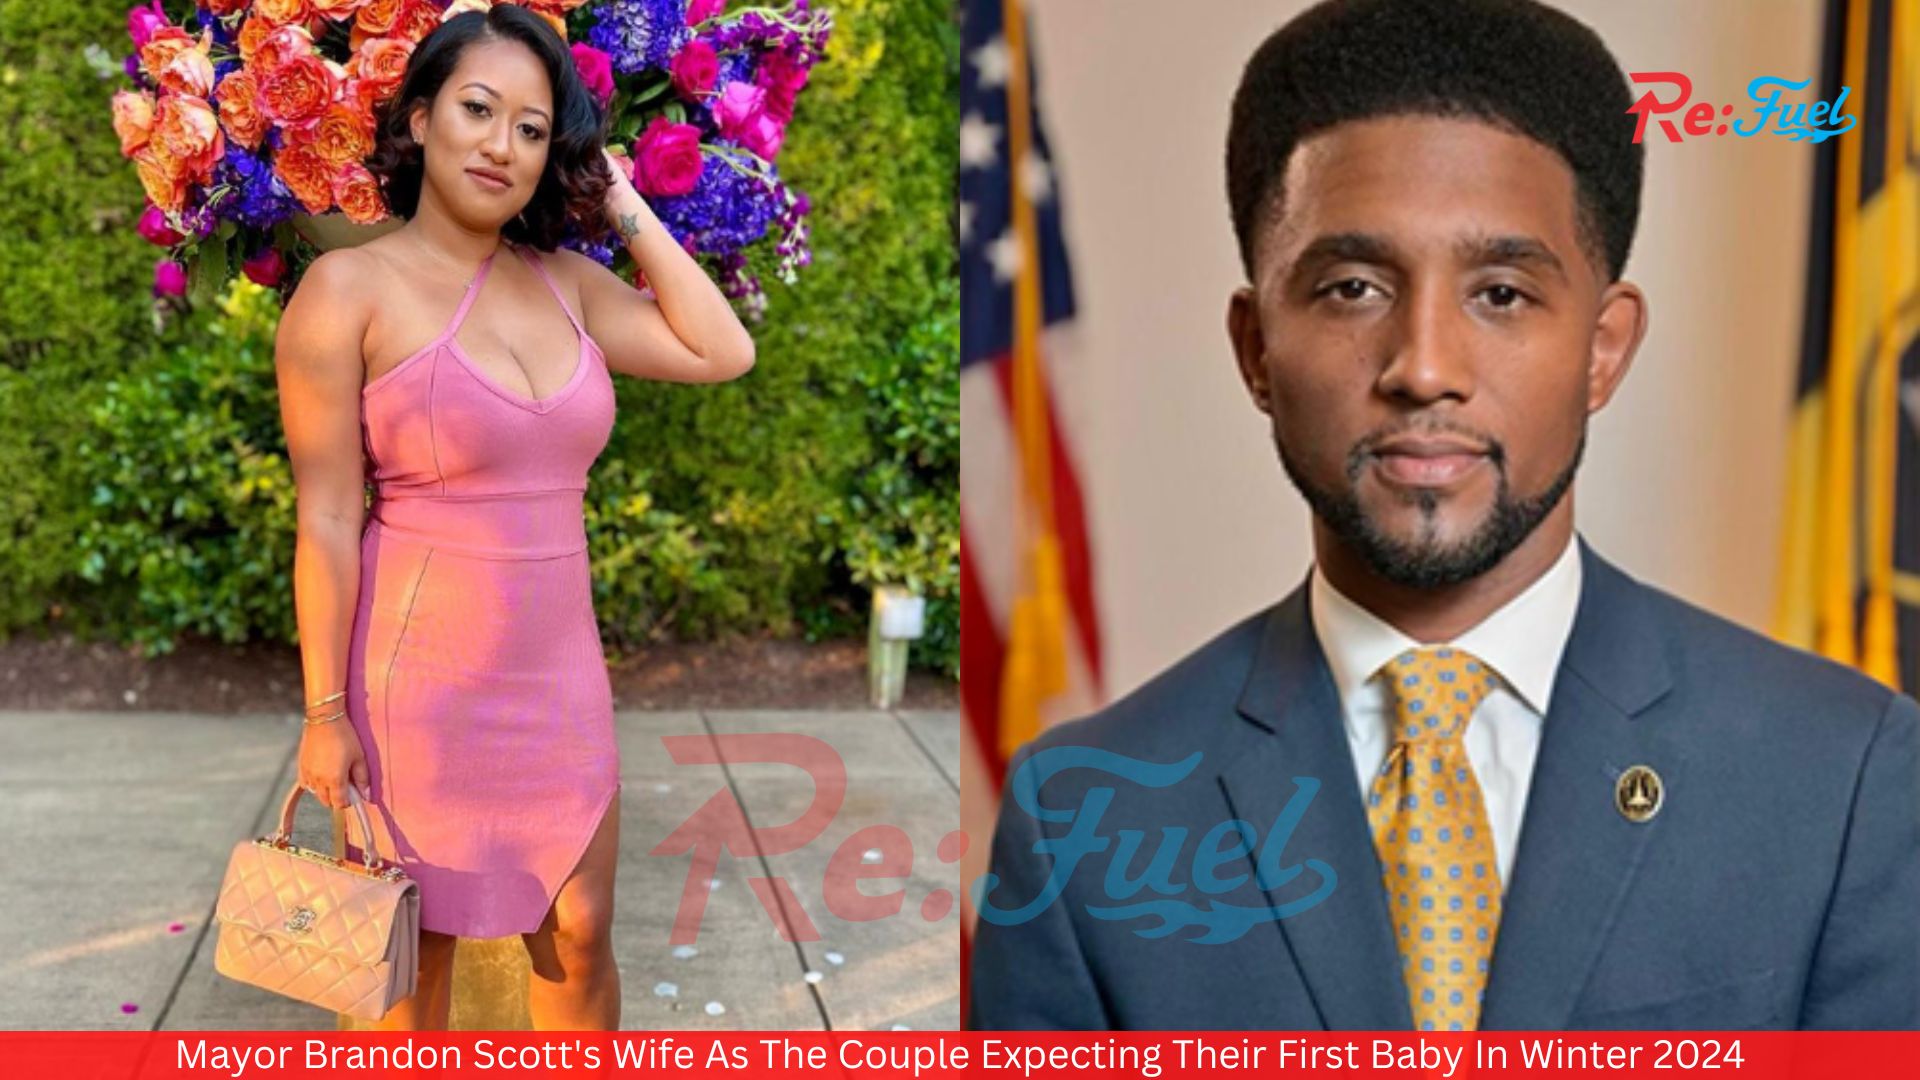 Mayor Brandon Scott's Wife As The Couple Expecting Their First Baby In Winter 2024